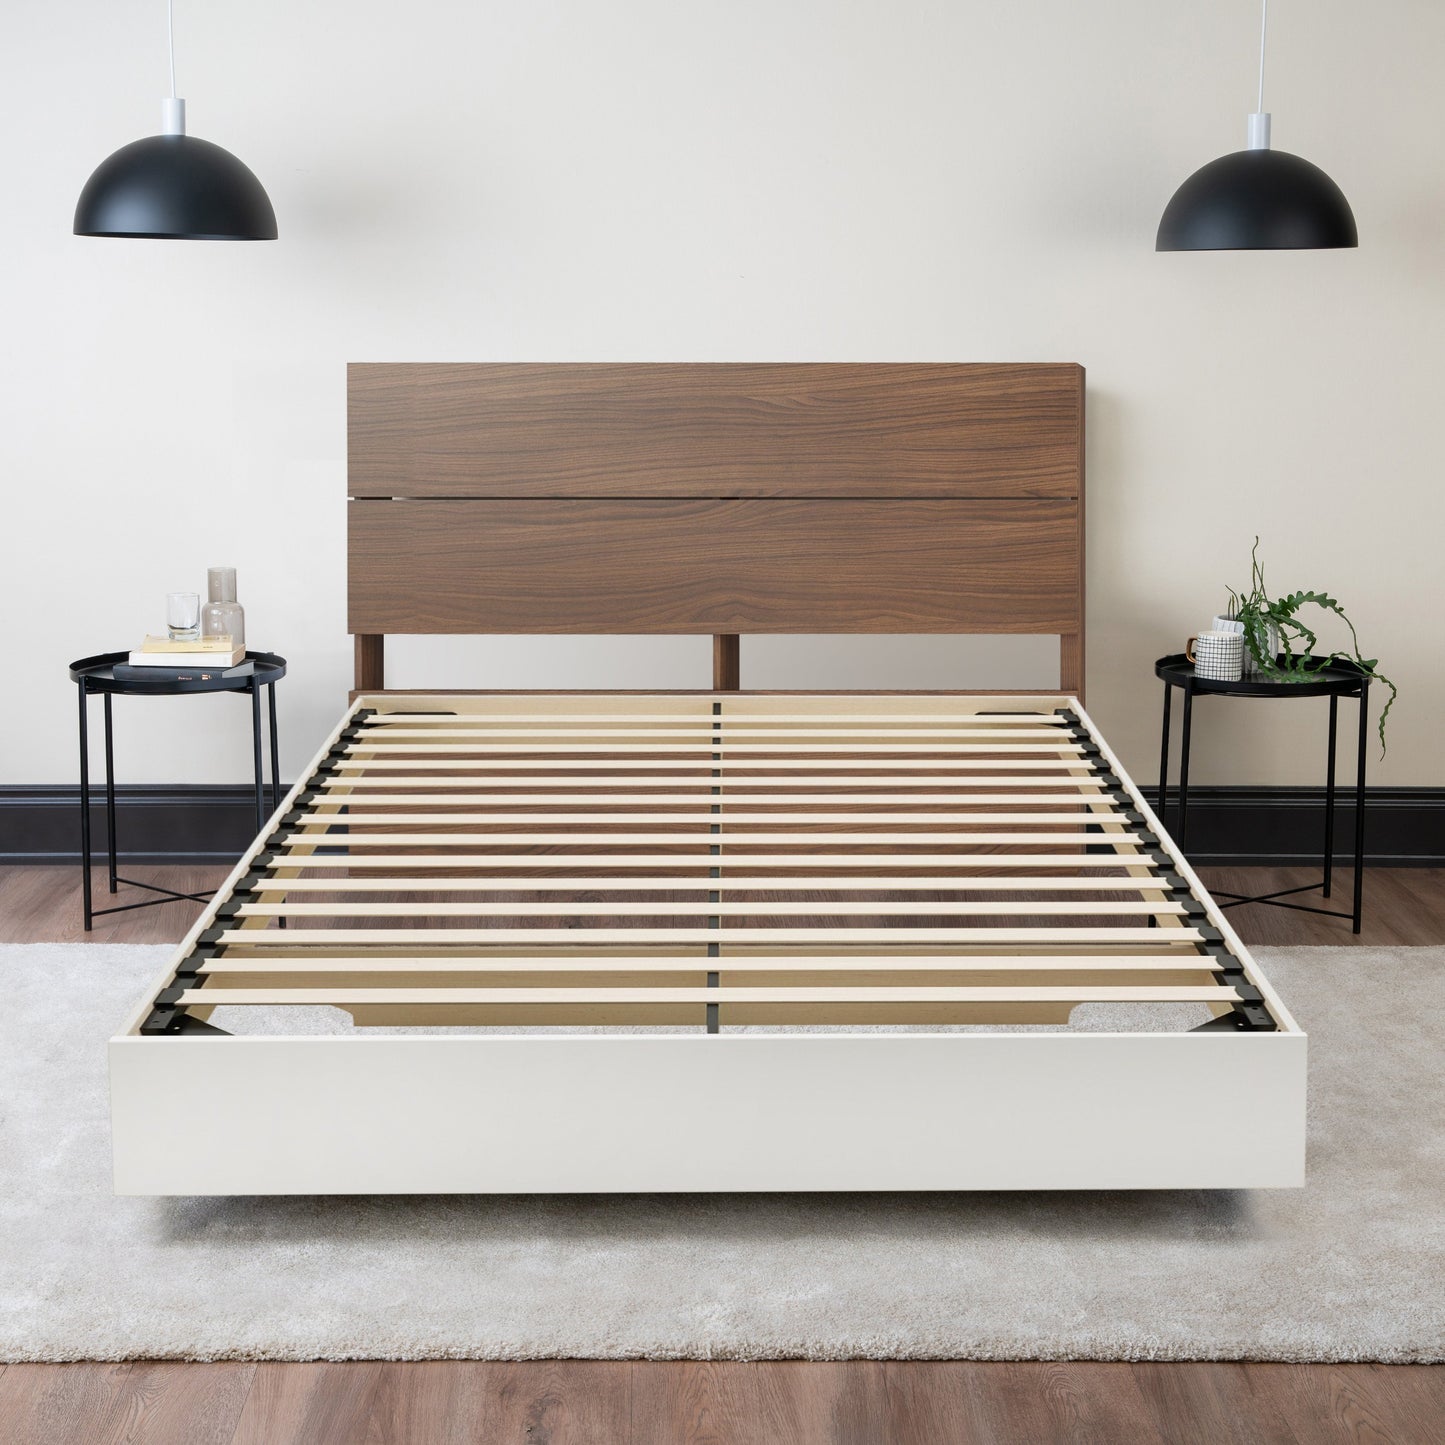 Floating Wood Bed with Headboard